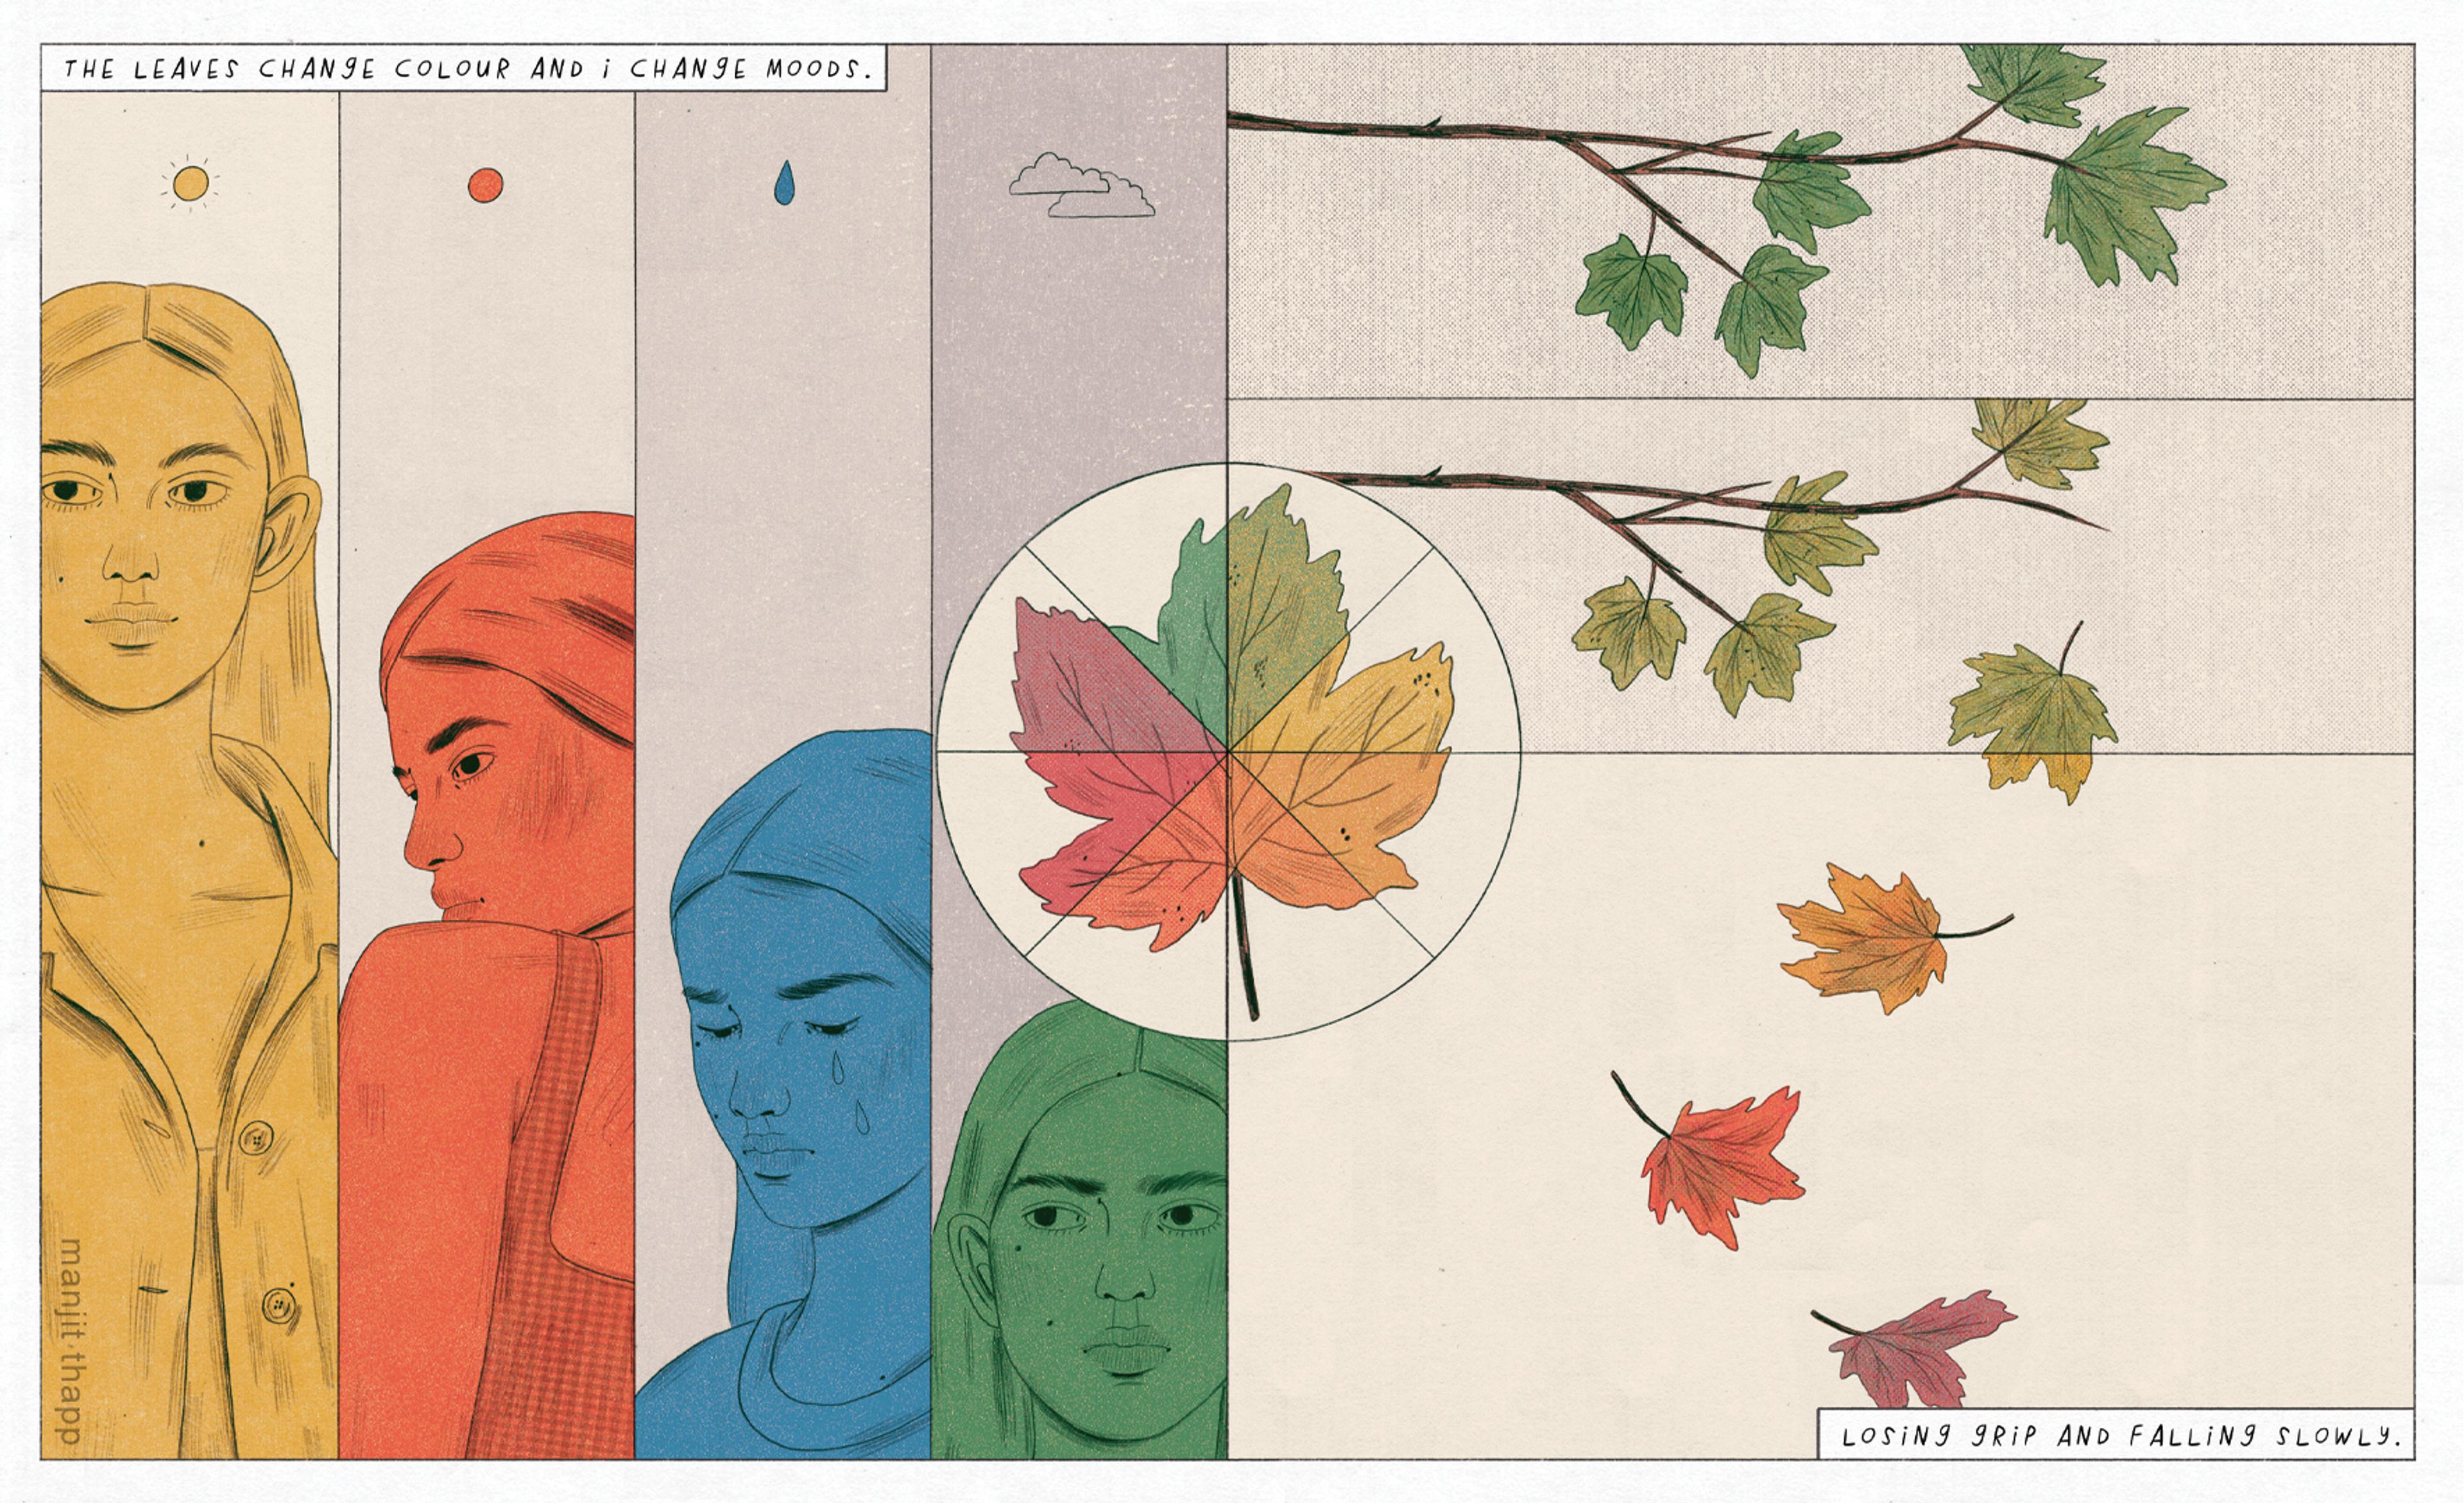 Comic panels depicting how the leaves changing colour in autumn affect the protagonist's changing mood